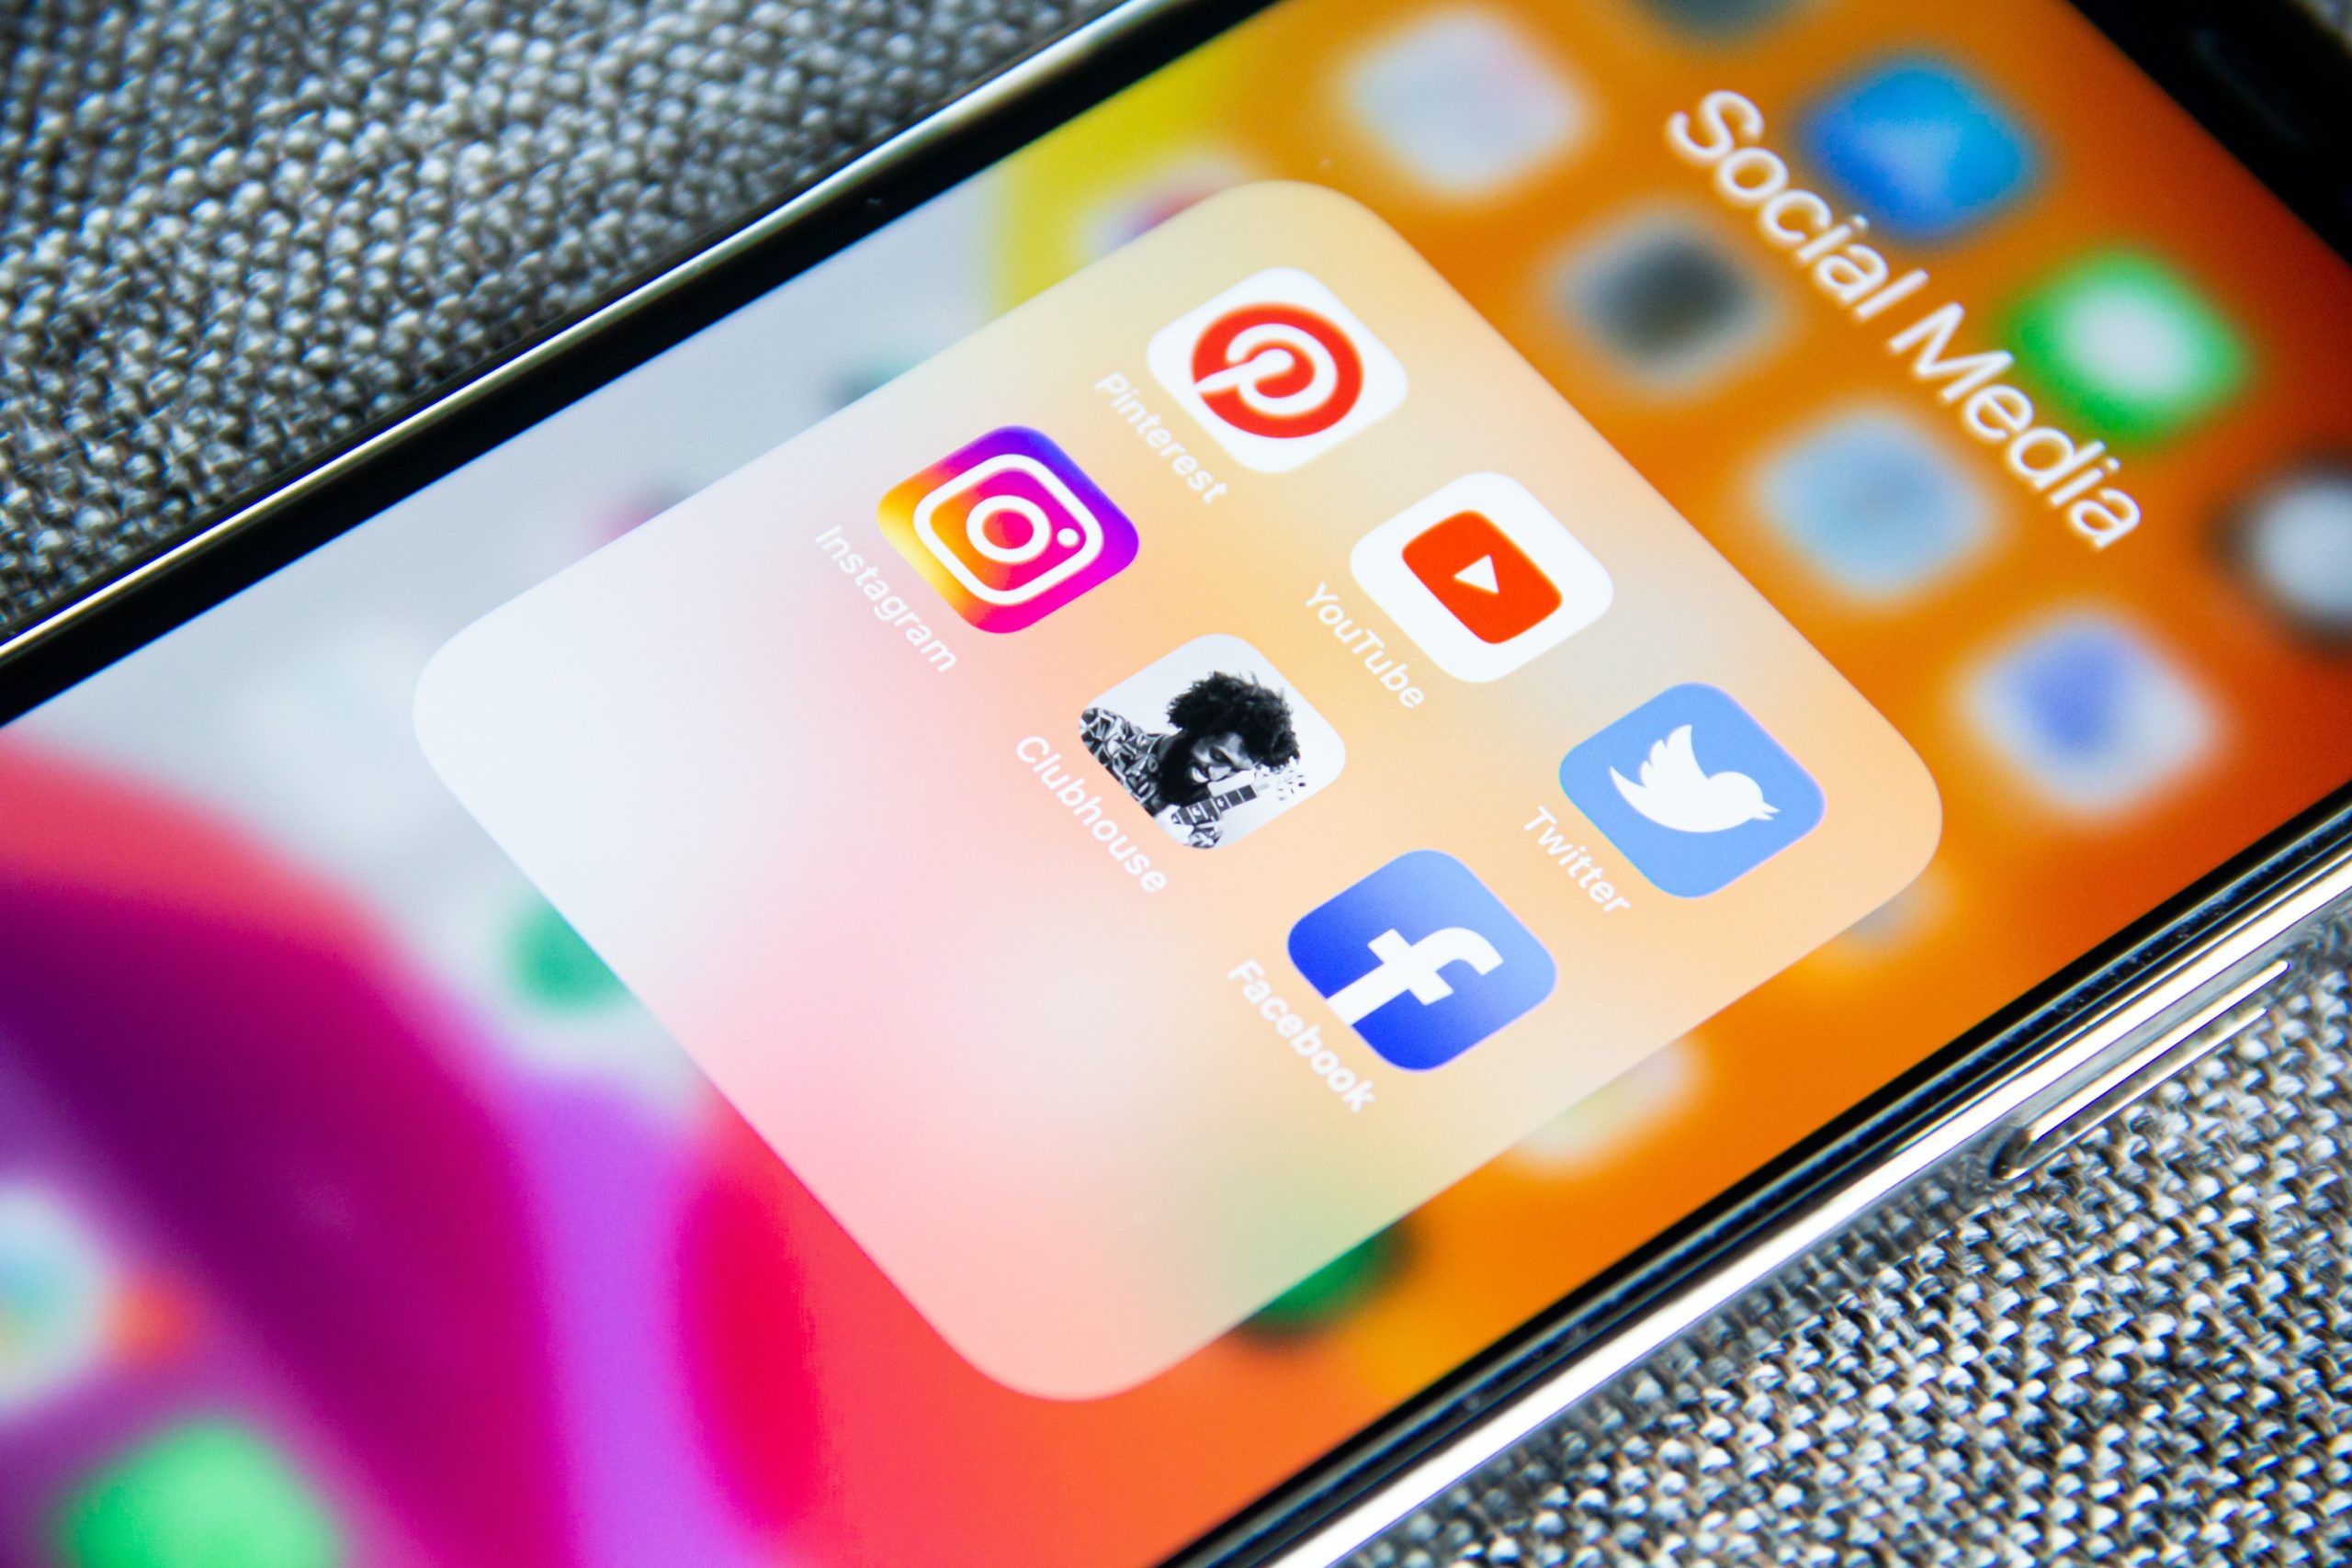 iPhone showing social media apps